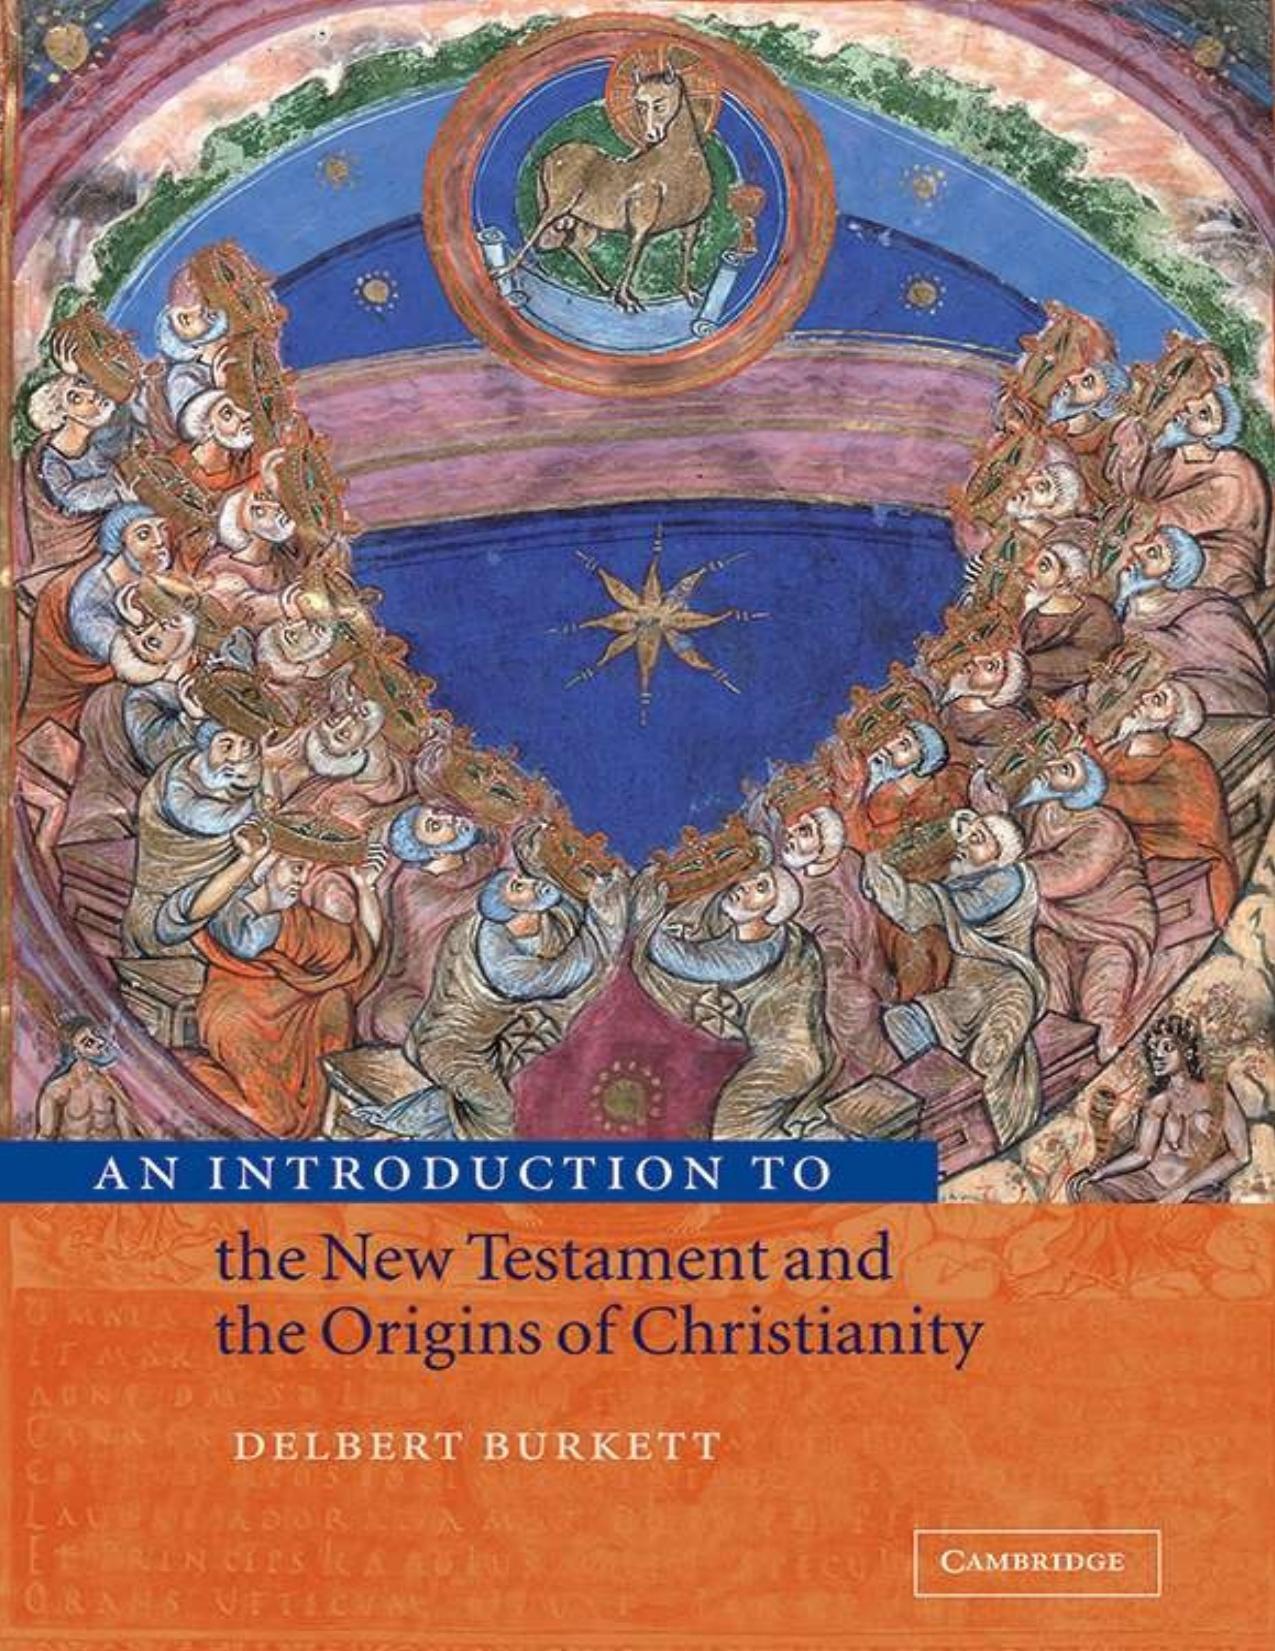 An Introduction to the New Testament and the Origins of Christianity (Introduction to Religion) by Delbert Burkett